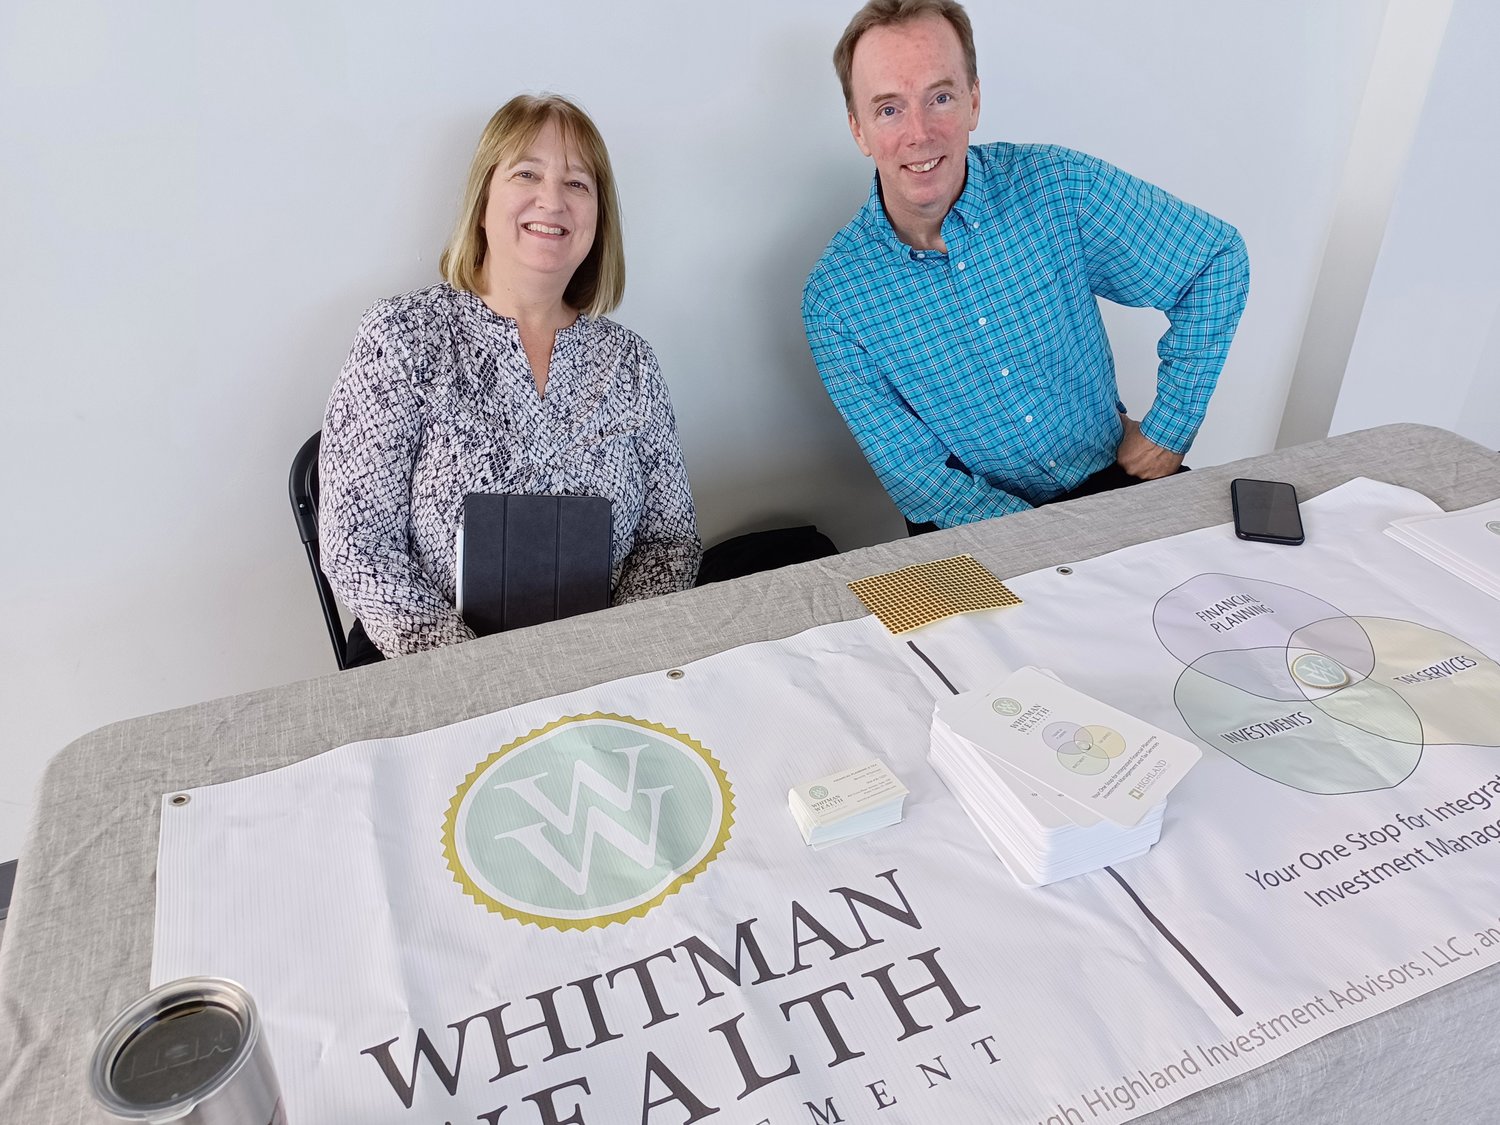 Beverly Whitman and Mark Whitman of Whitman Wealth Management informed Business Expo attendees about the services they offer.